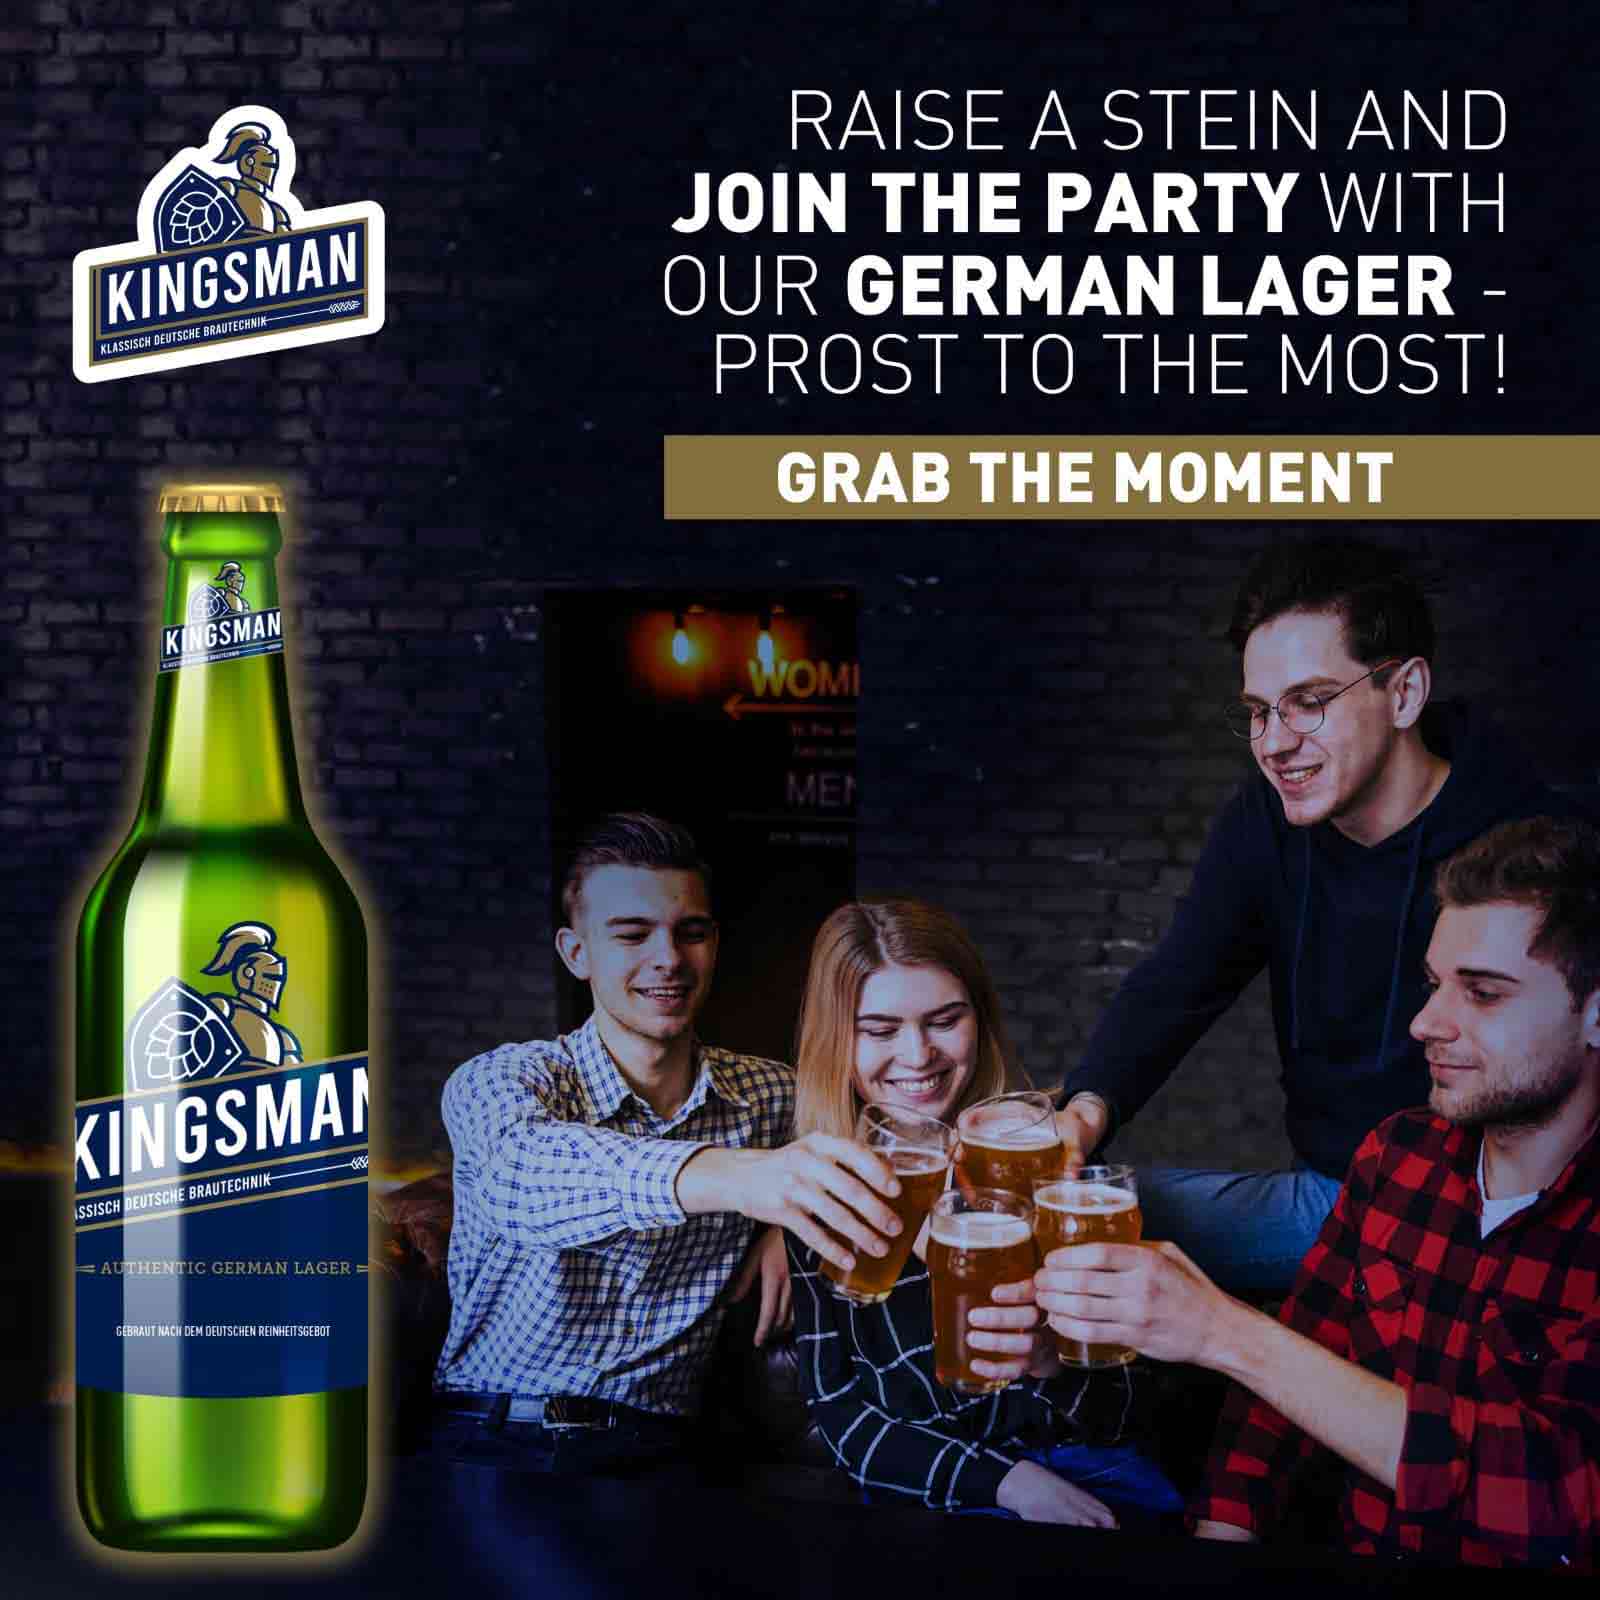 Join the party and enjoy the moment with Kingsman Beer	